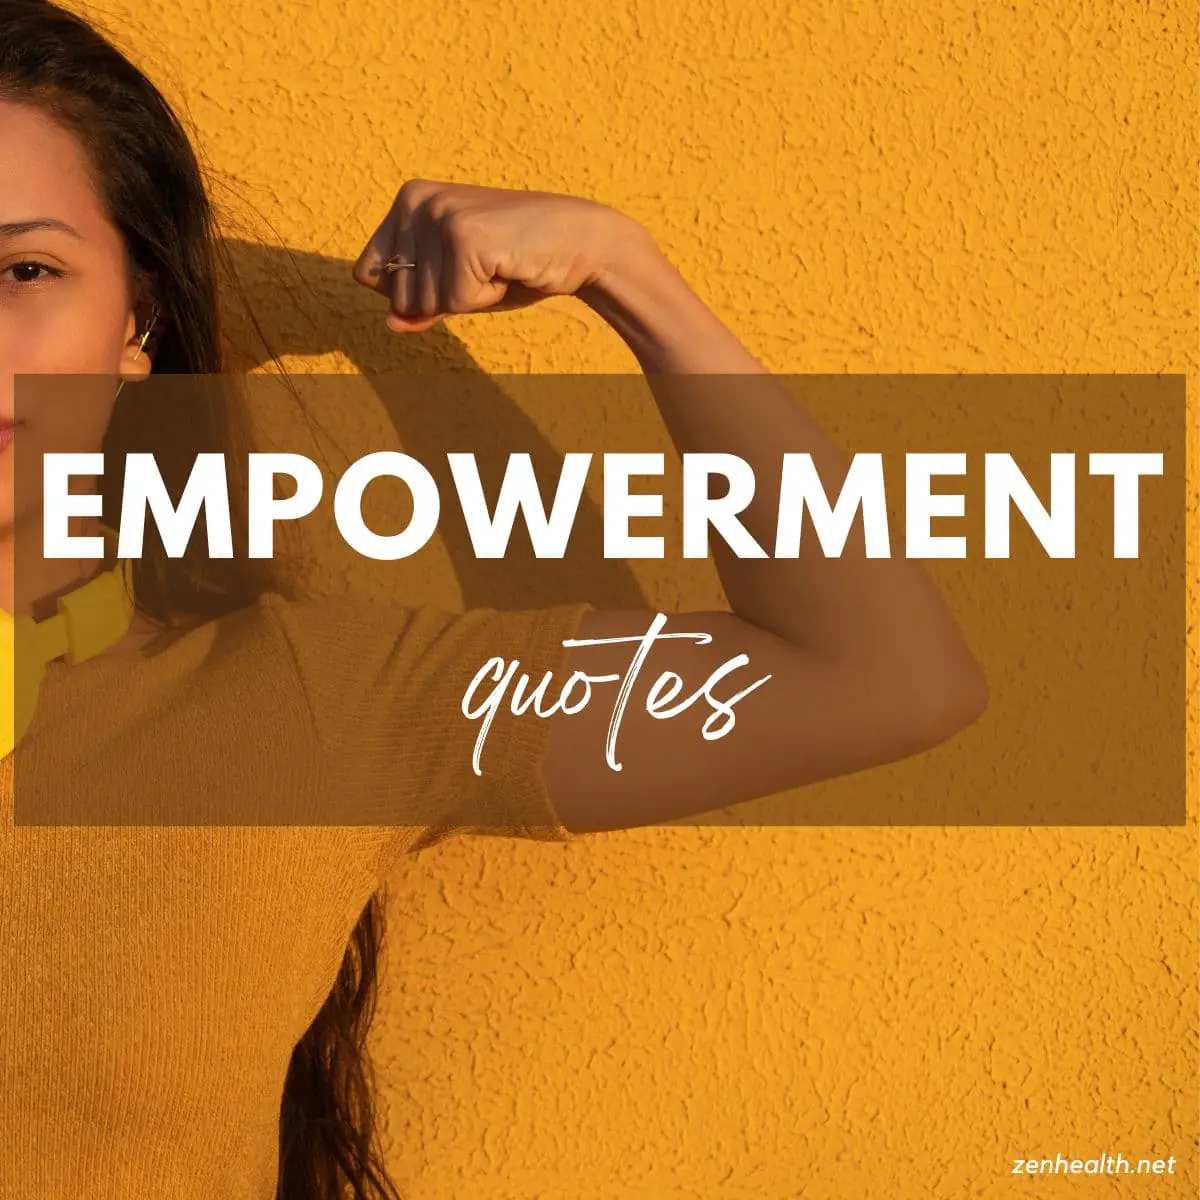 empowerment quotes text overlay on a woman flexing her bicep while wearing a yellow outfit in front of a yellow wall